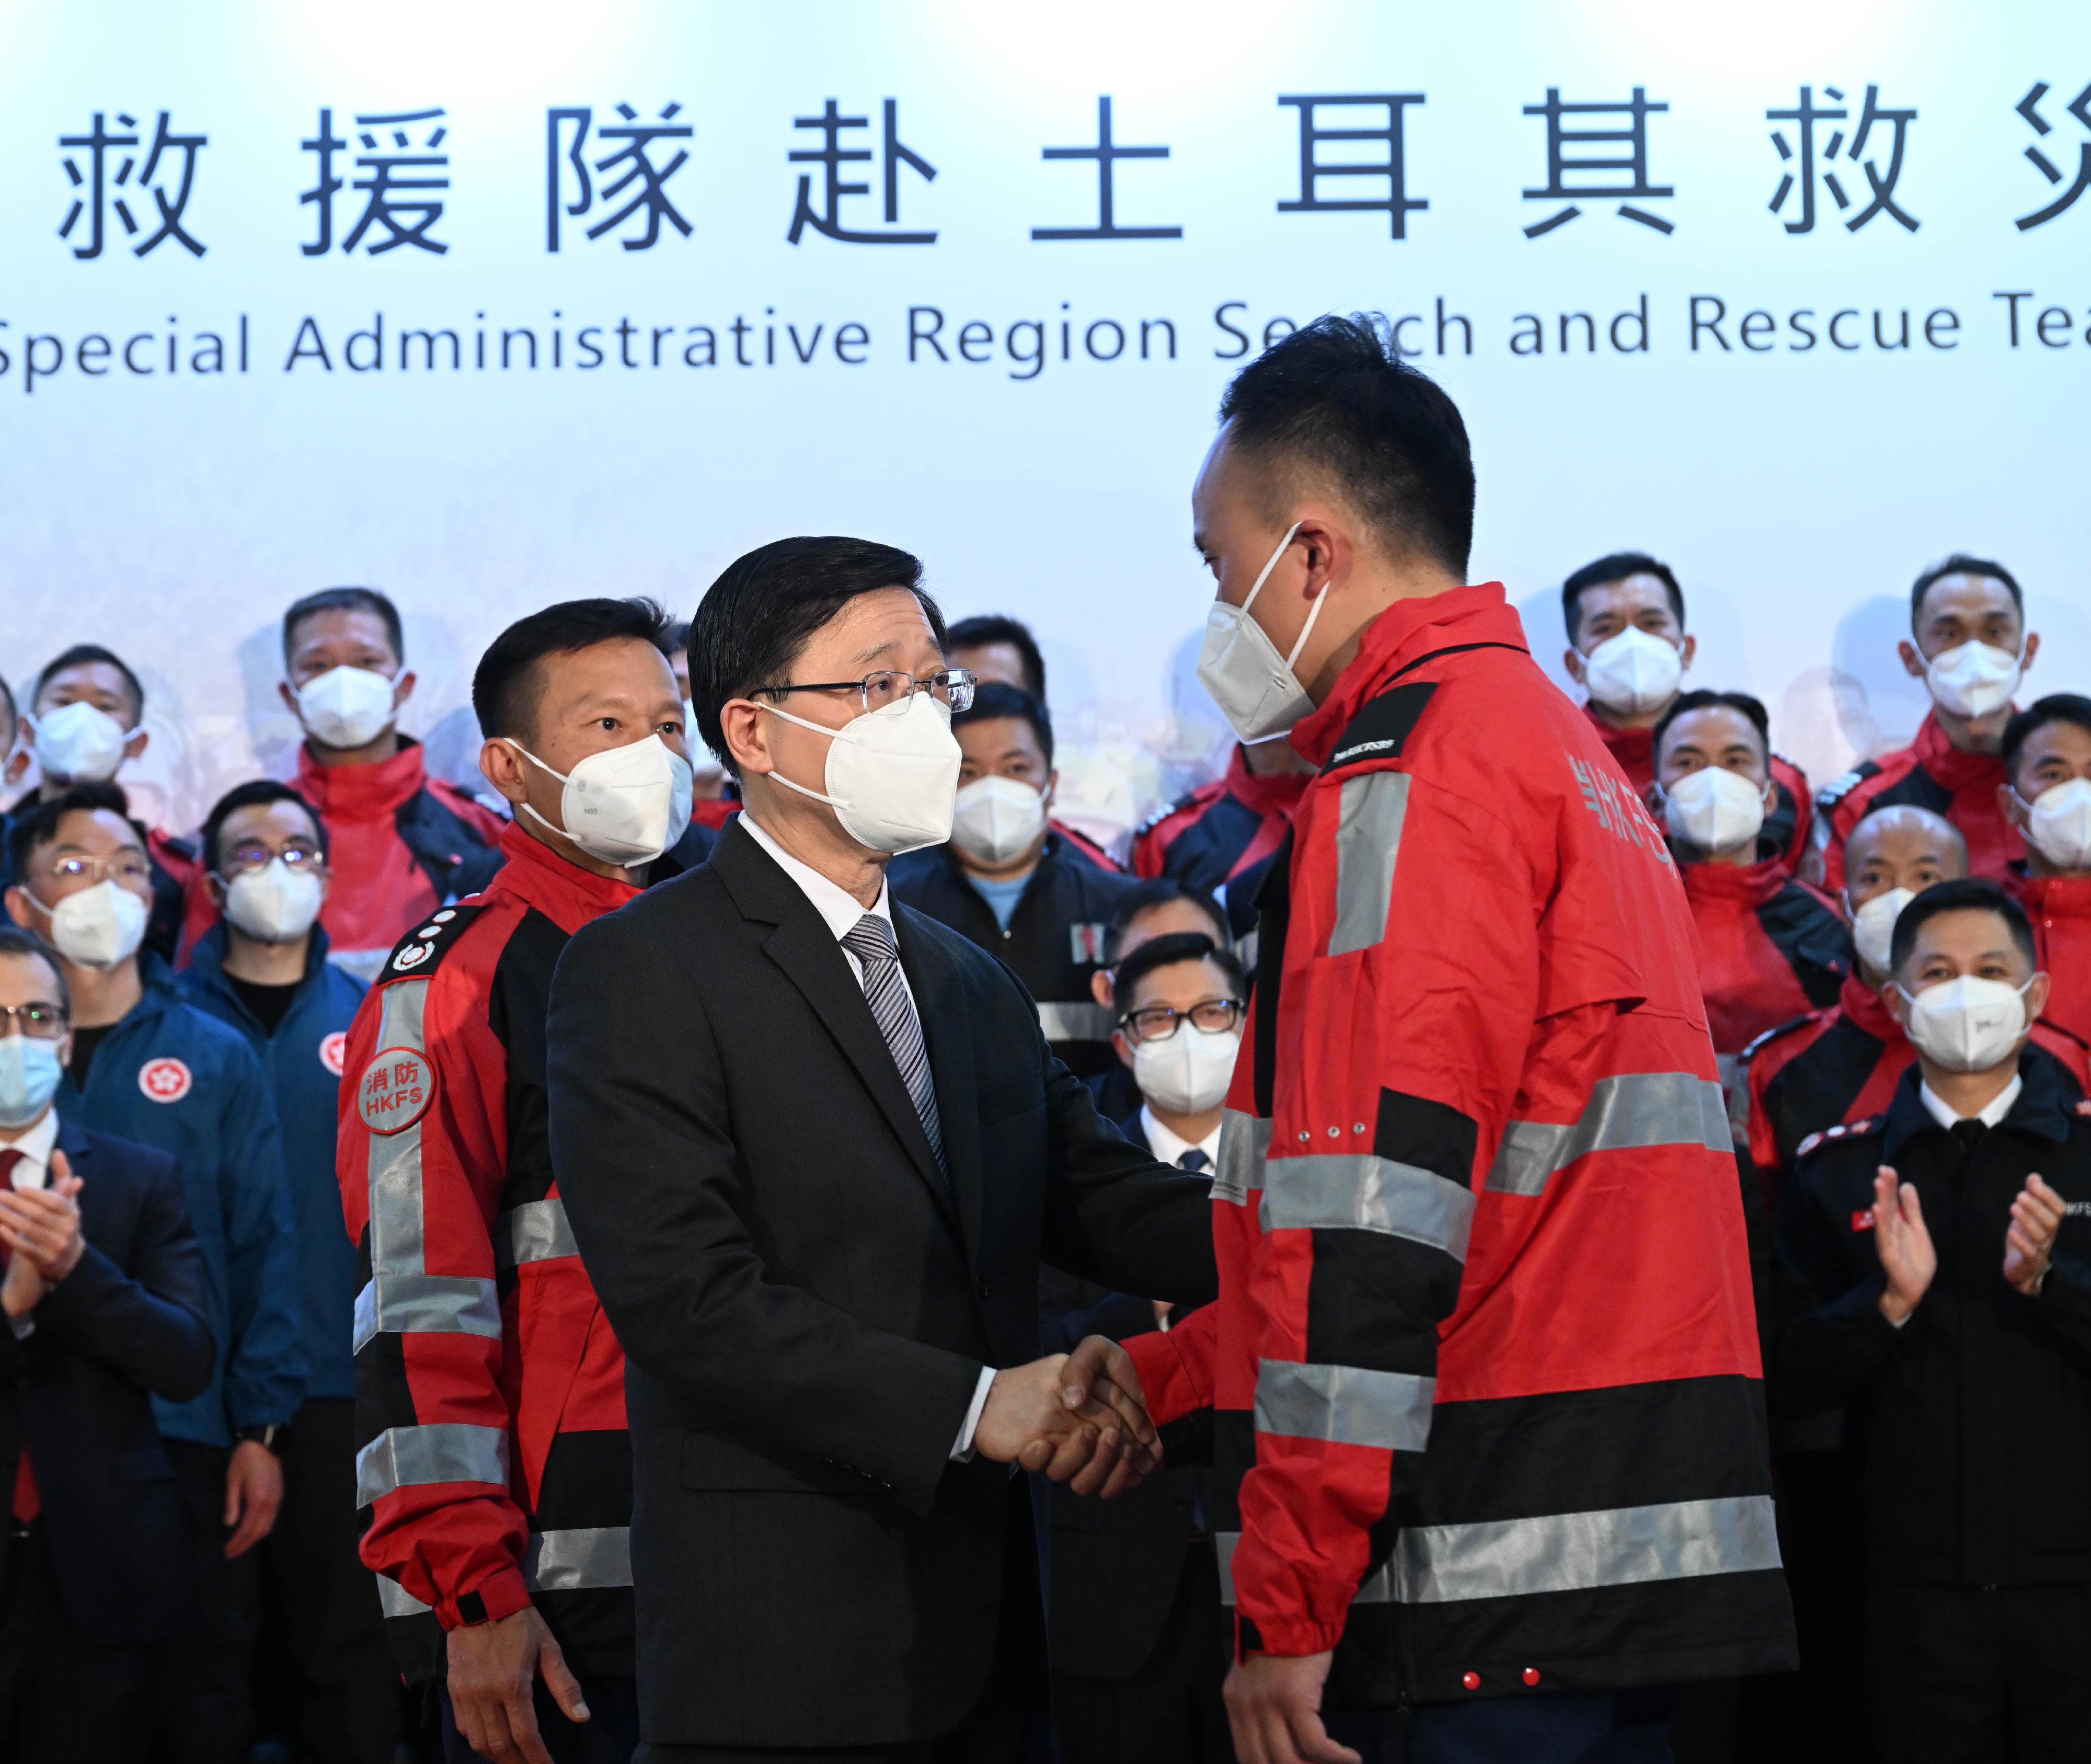 The Chief Executive, Mr John Lee, attended the Welcome Ceremony of the Hong Kong Special Administrative Region (HKSAR) Search and Rescue Team returning from Türkiye today (February 18). Photo shows Mr Lee (left) shaking hands with the member of the HKSAR Search and Rescue Team at the ceremony.